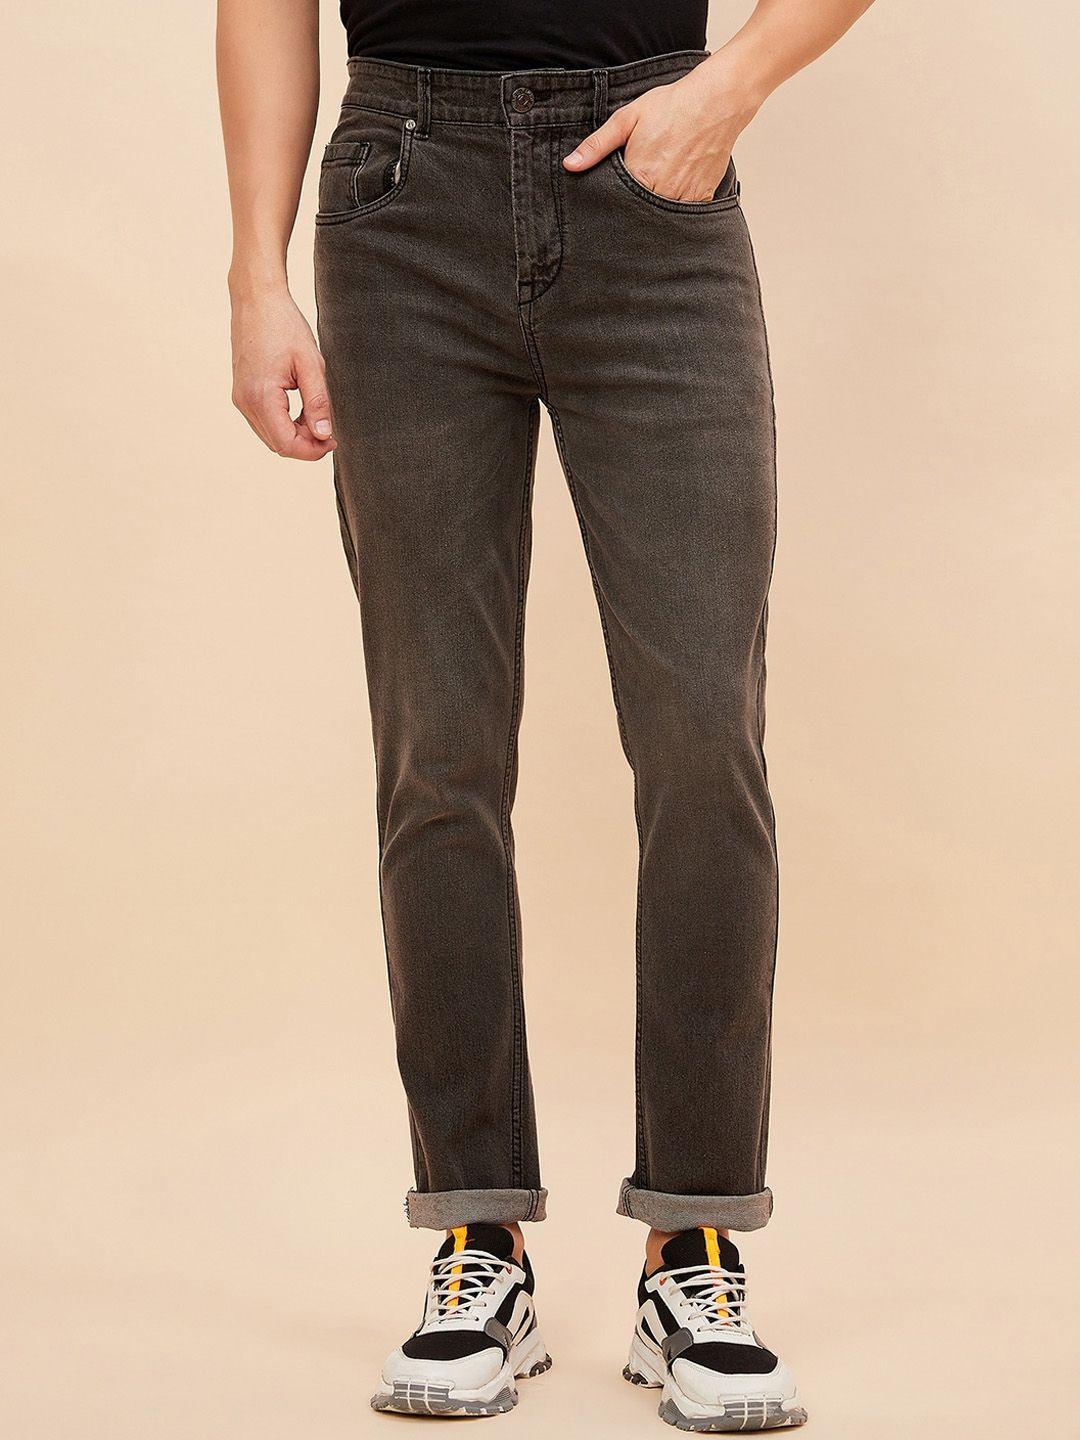 high-star-men-mid-rise-straight-fit-light-fade-whiskers-stretchable-jeans